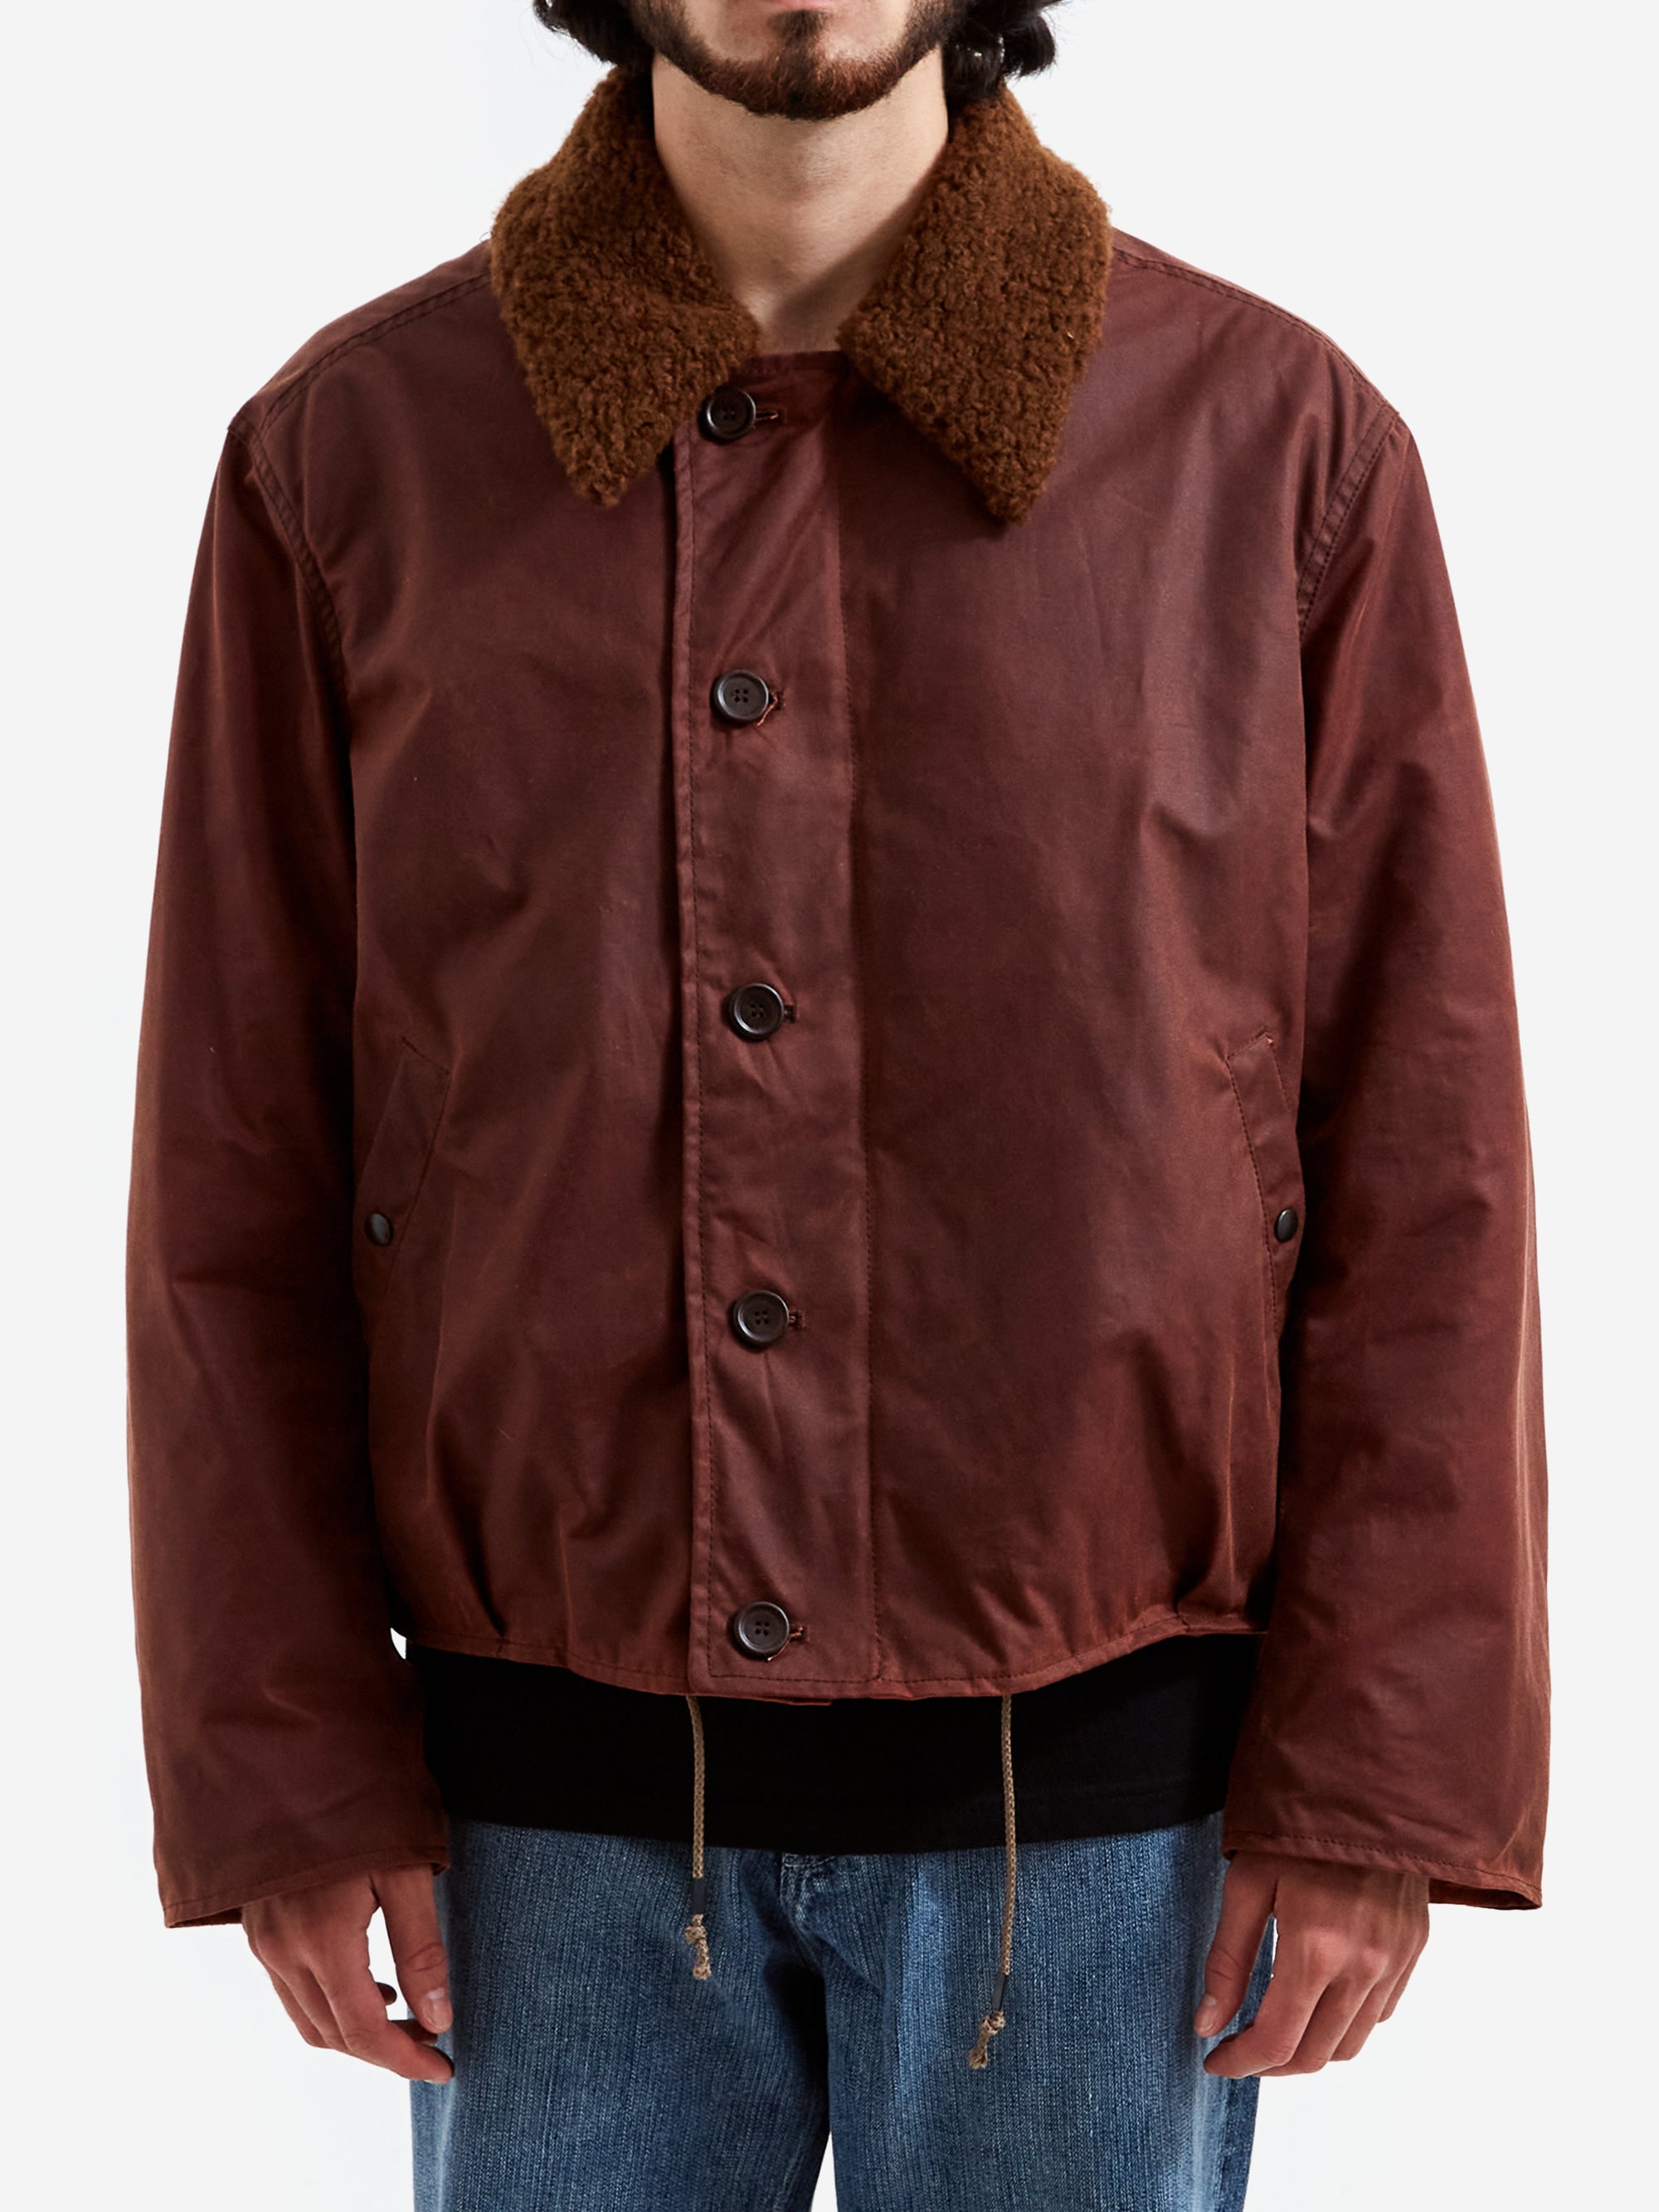 46 OUR LEGACY GRIZZLY JACKET OXBLOOD120000はどうでしょうか